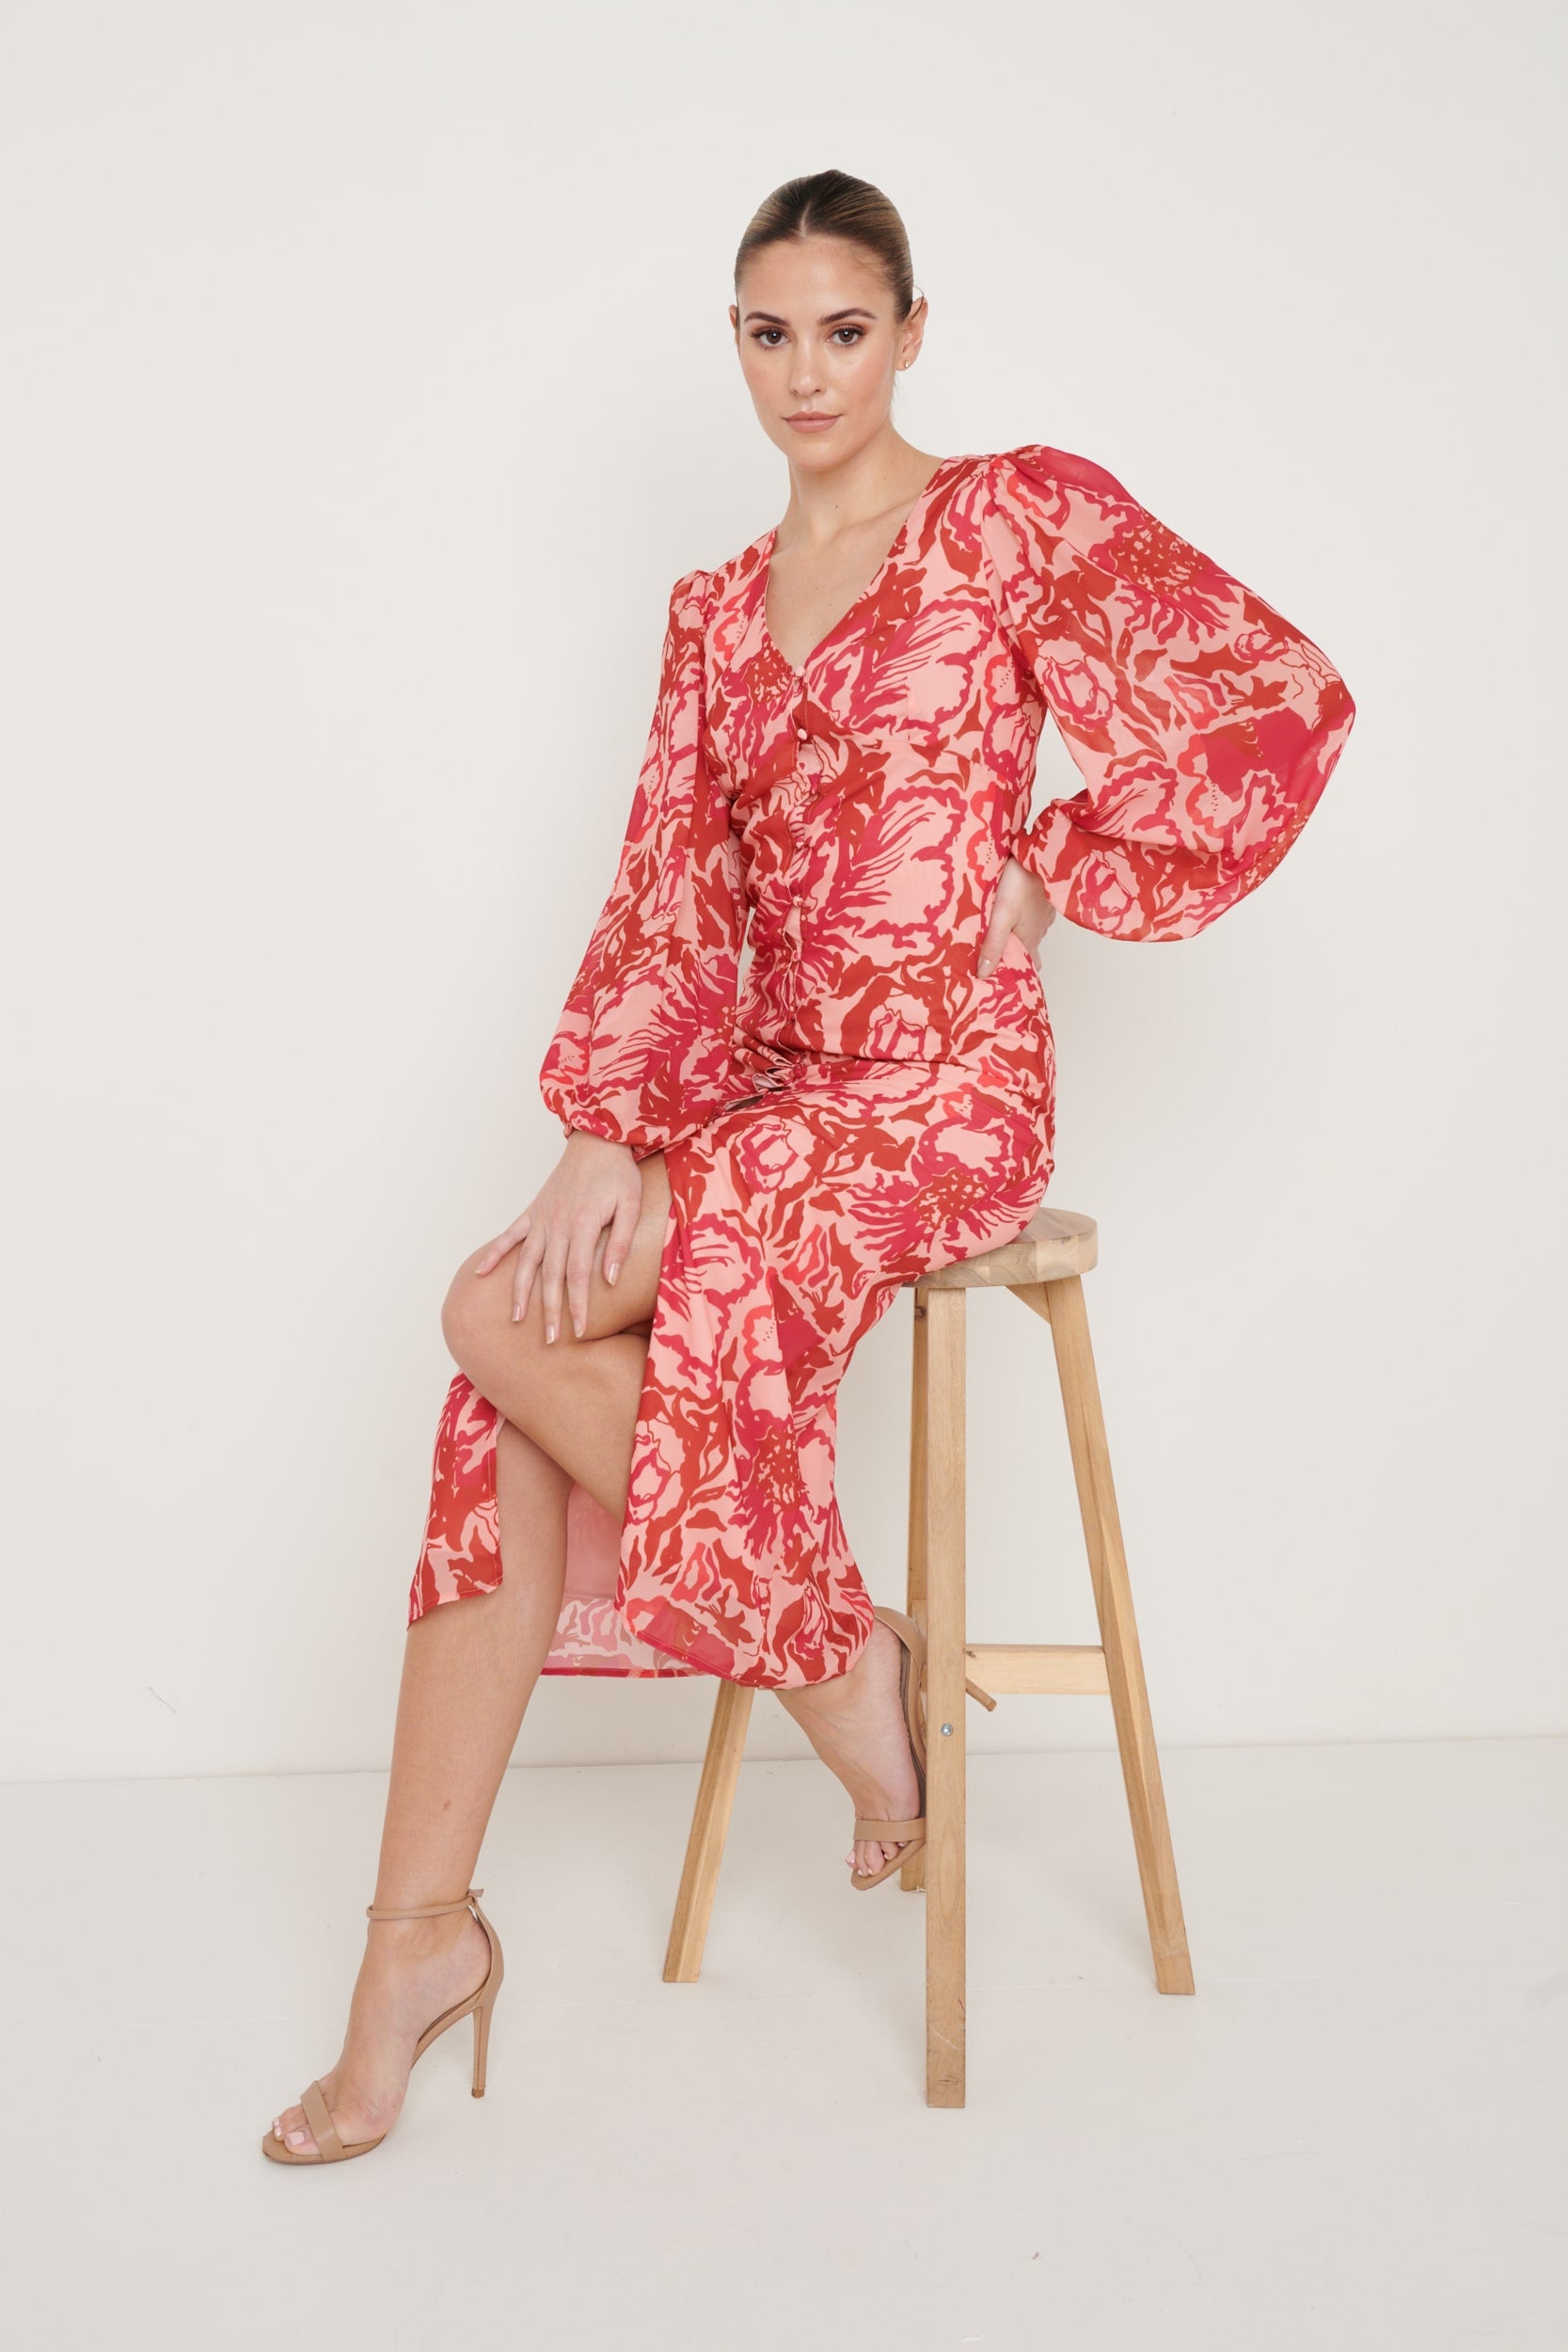 Naya Midaxi Dress - Pink and Red Floral